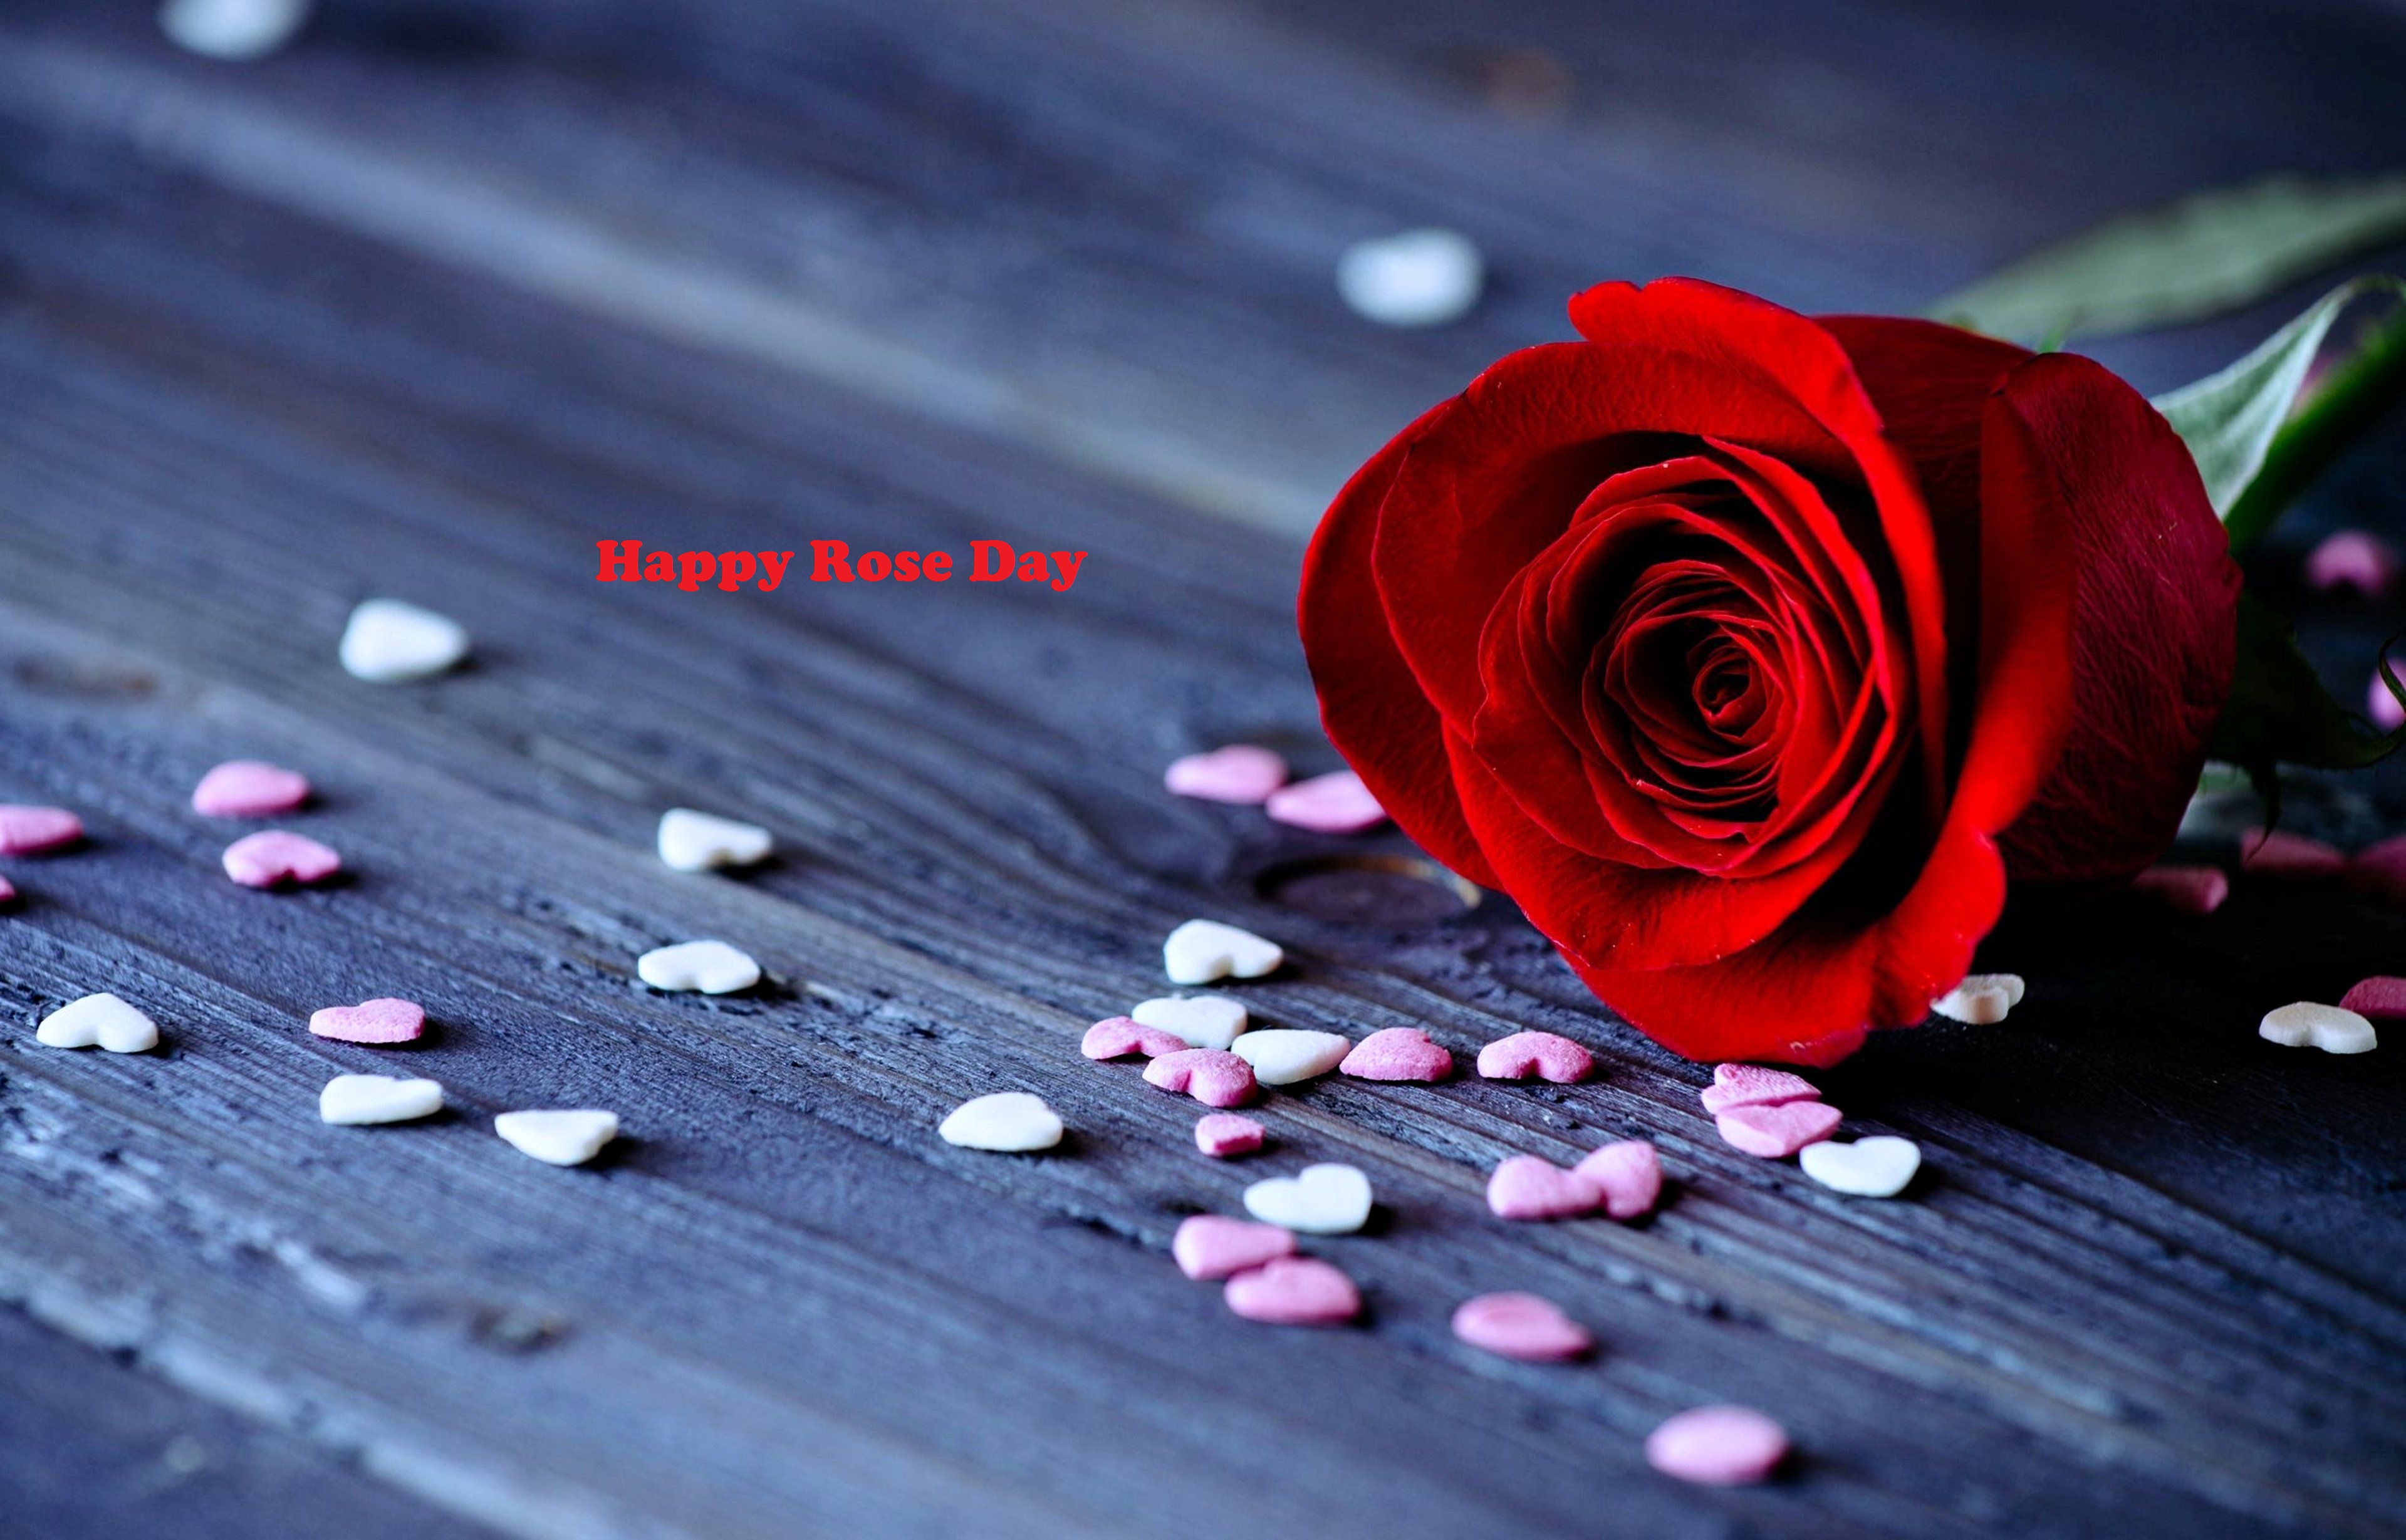 Happy Roses Day Wishes Pics 2017